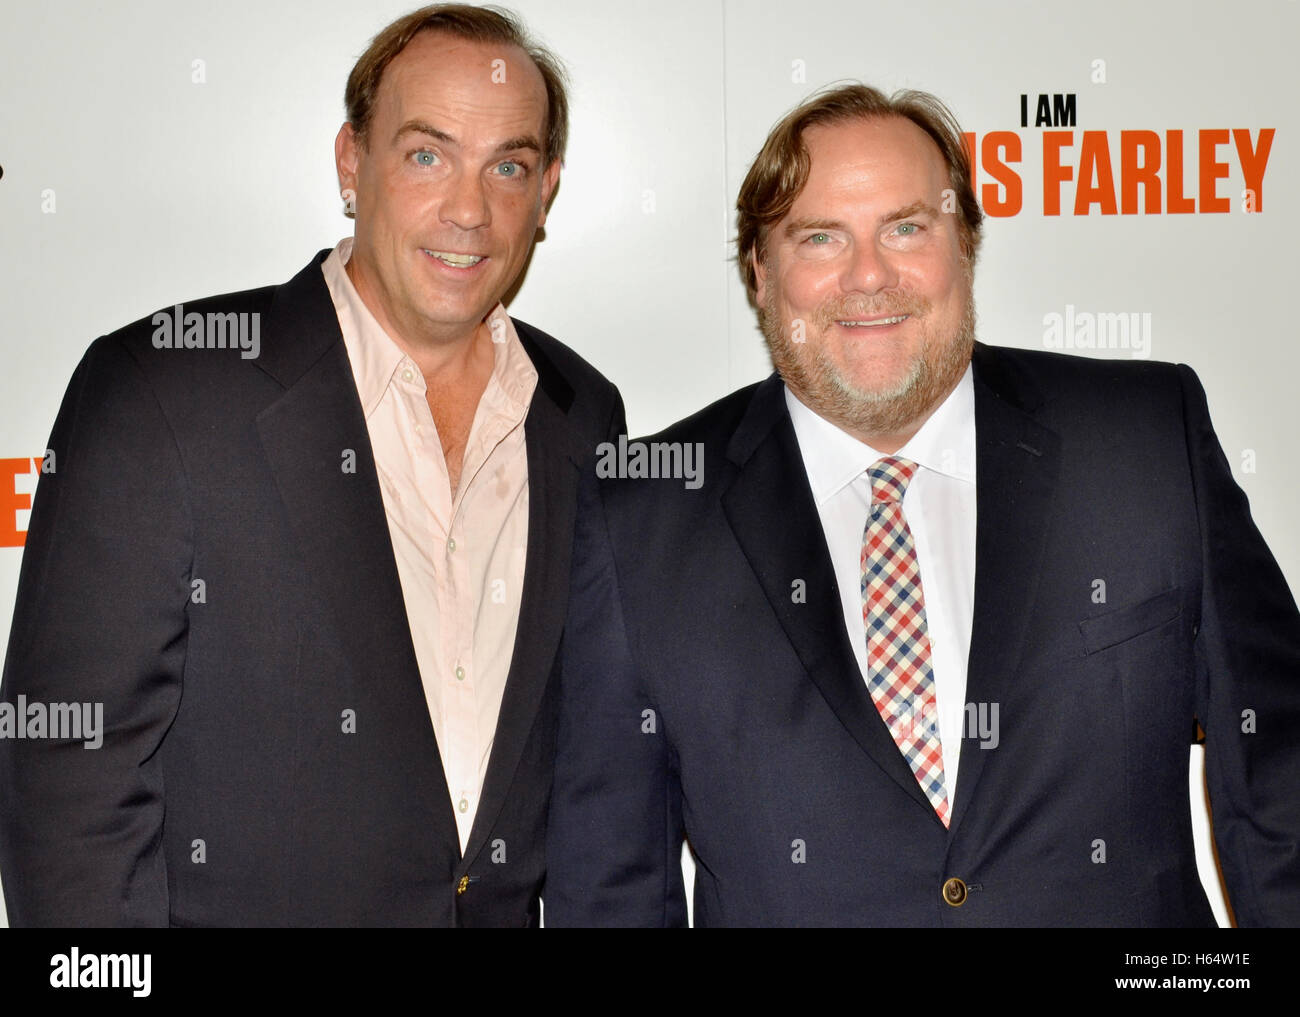 John Farley and Kevin Farley arrived at the Red Carpet Premiere of ...